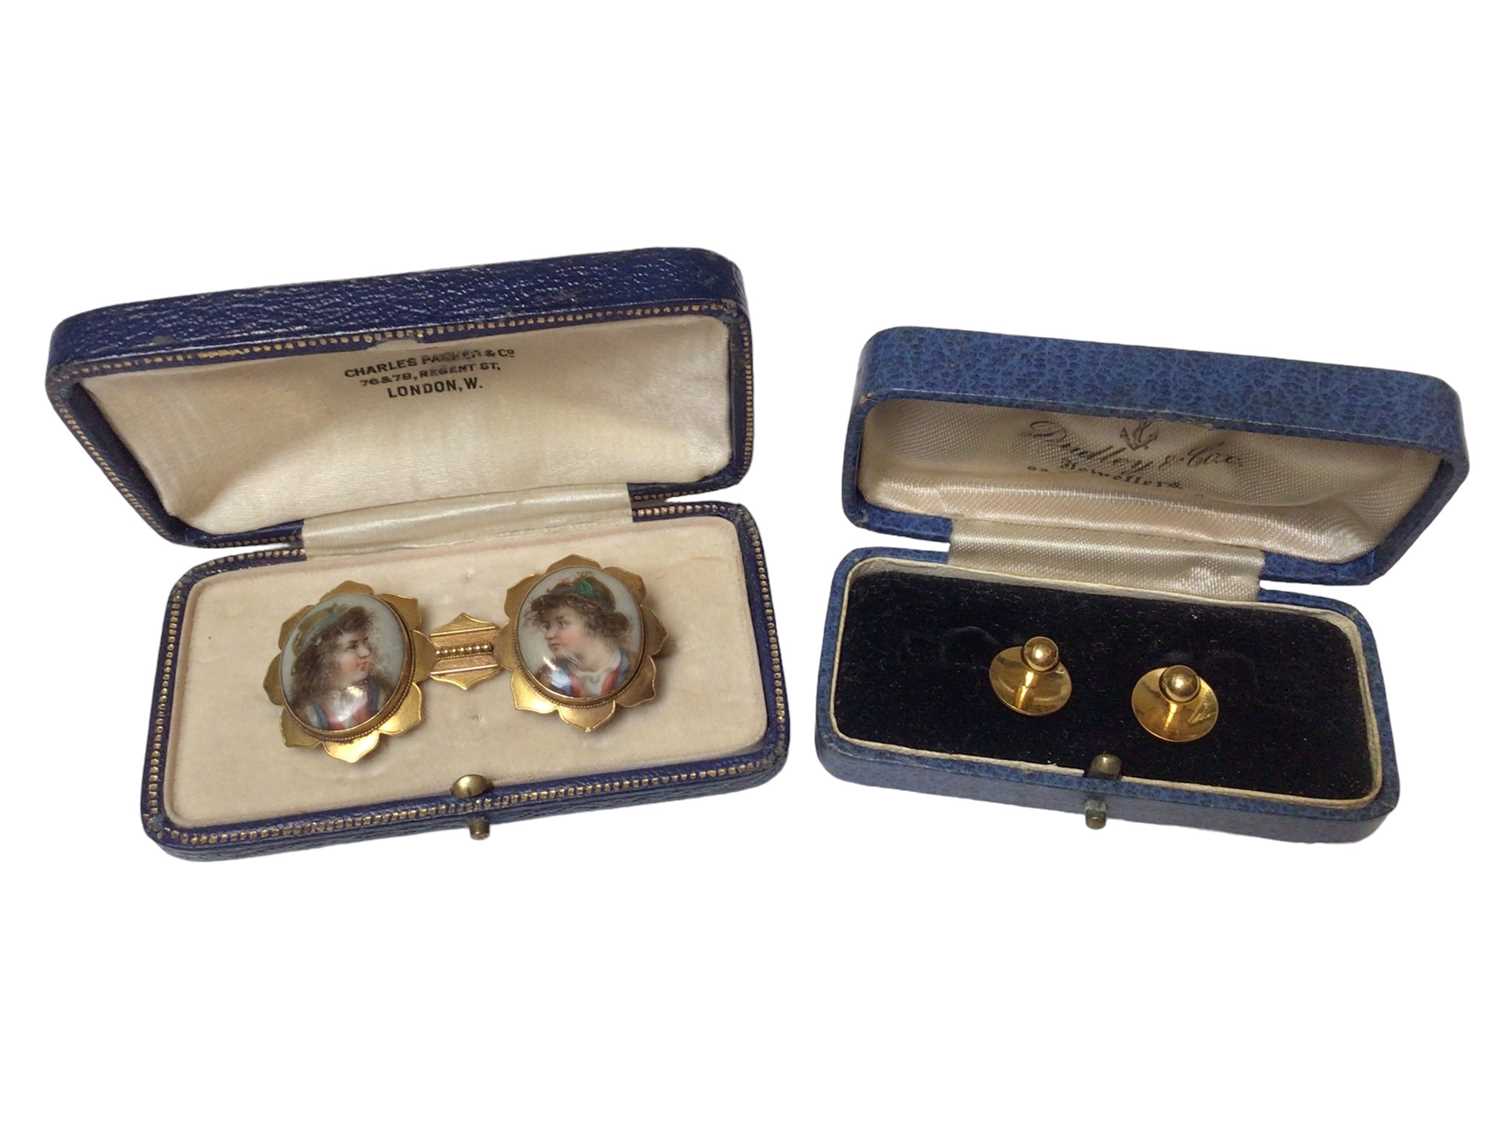 Lot 254 - Victorian 18ct gold mounted portrait miniature brooch with two oval ceramic panels depicting two portraits, named and dated on reverse 1890, 55mm, together with one 18ct gold and one 9ct gold stud...